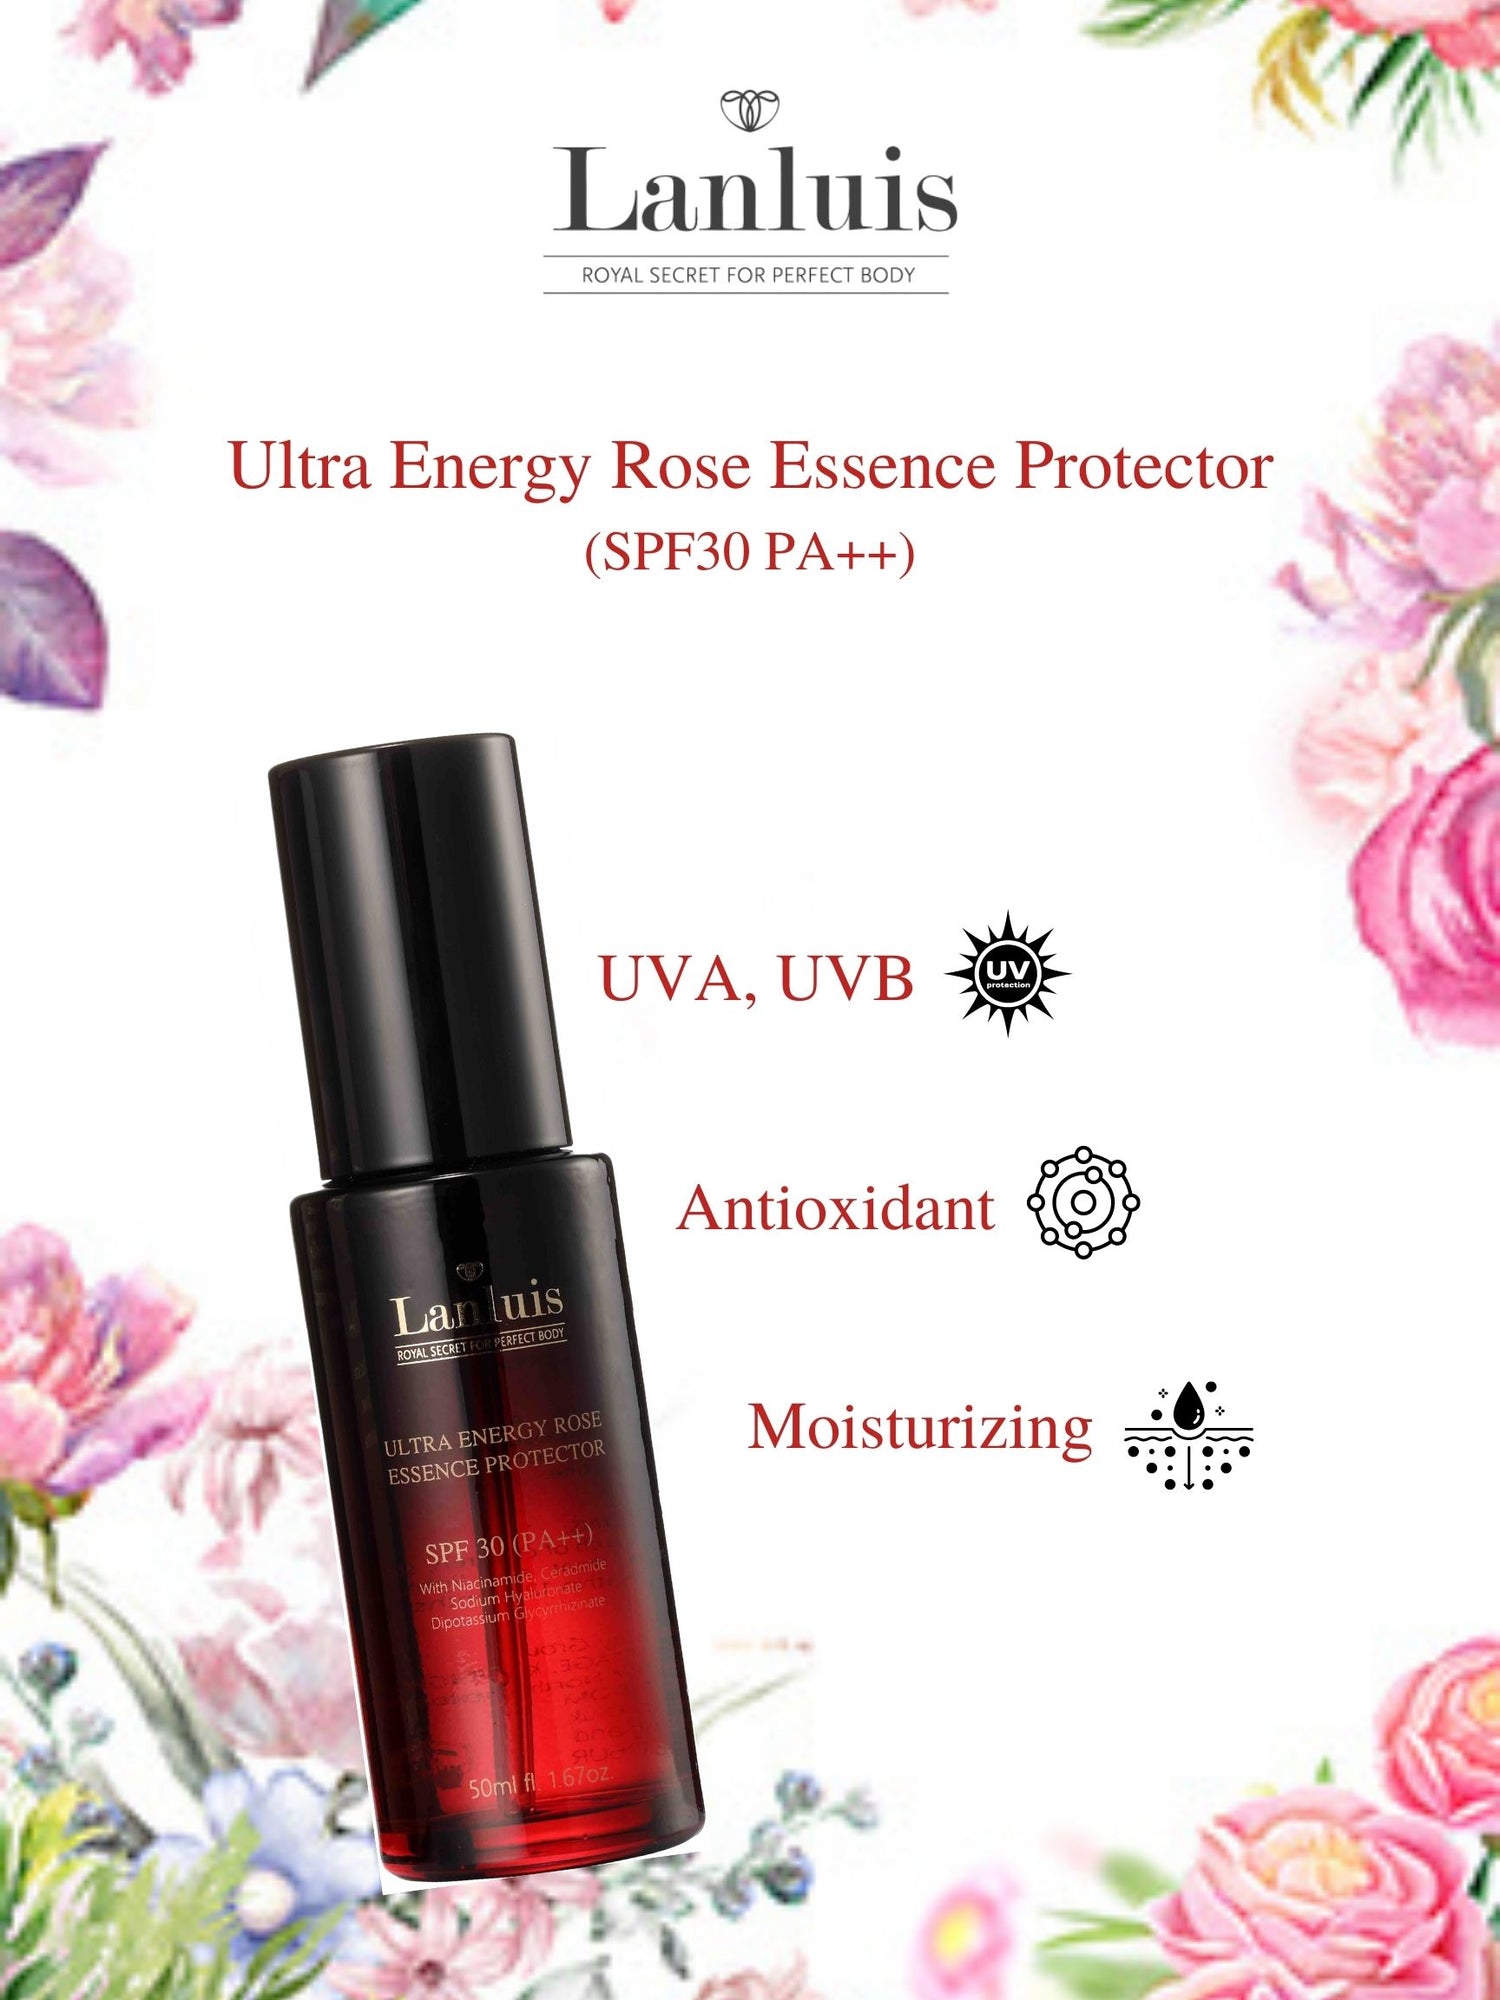 Ultra Energy Rose Essence Protector SPF30 (PA++)